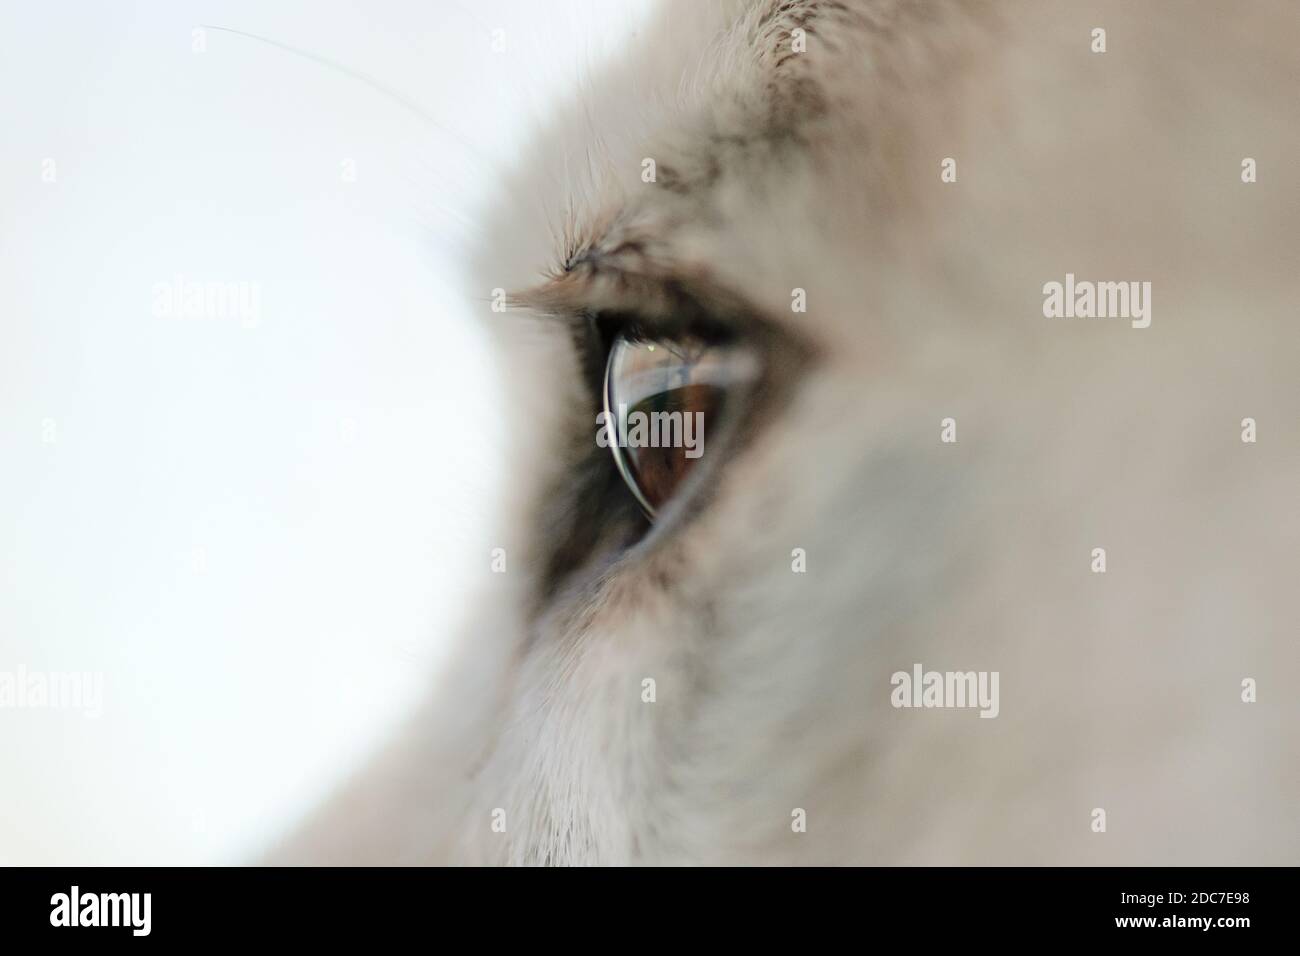 close up of eye of a dog Stock Photo